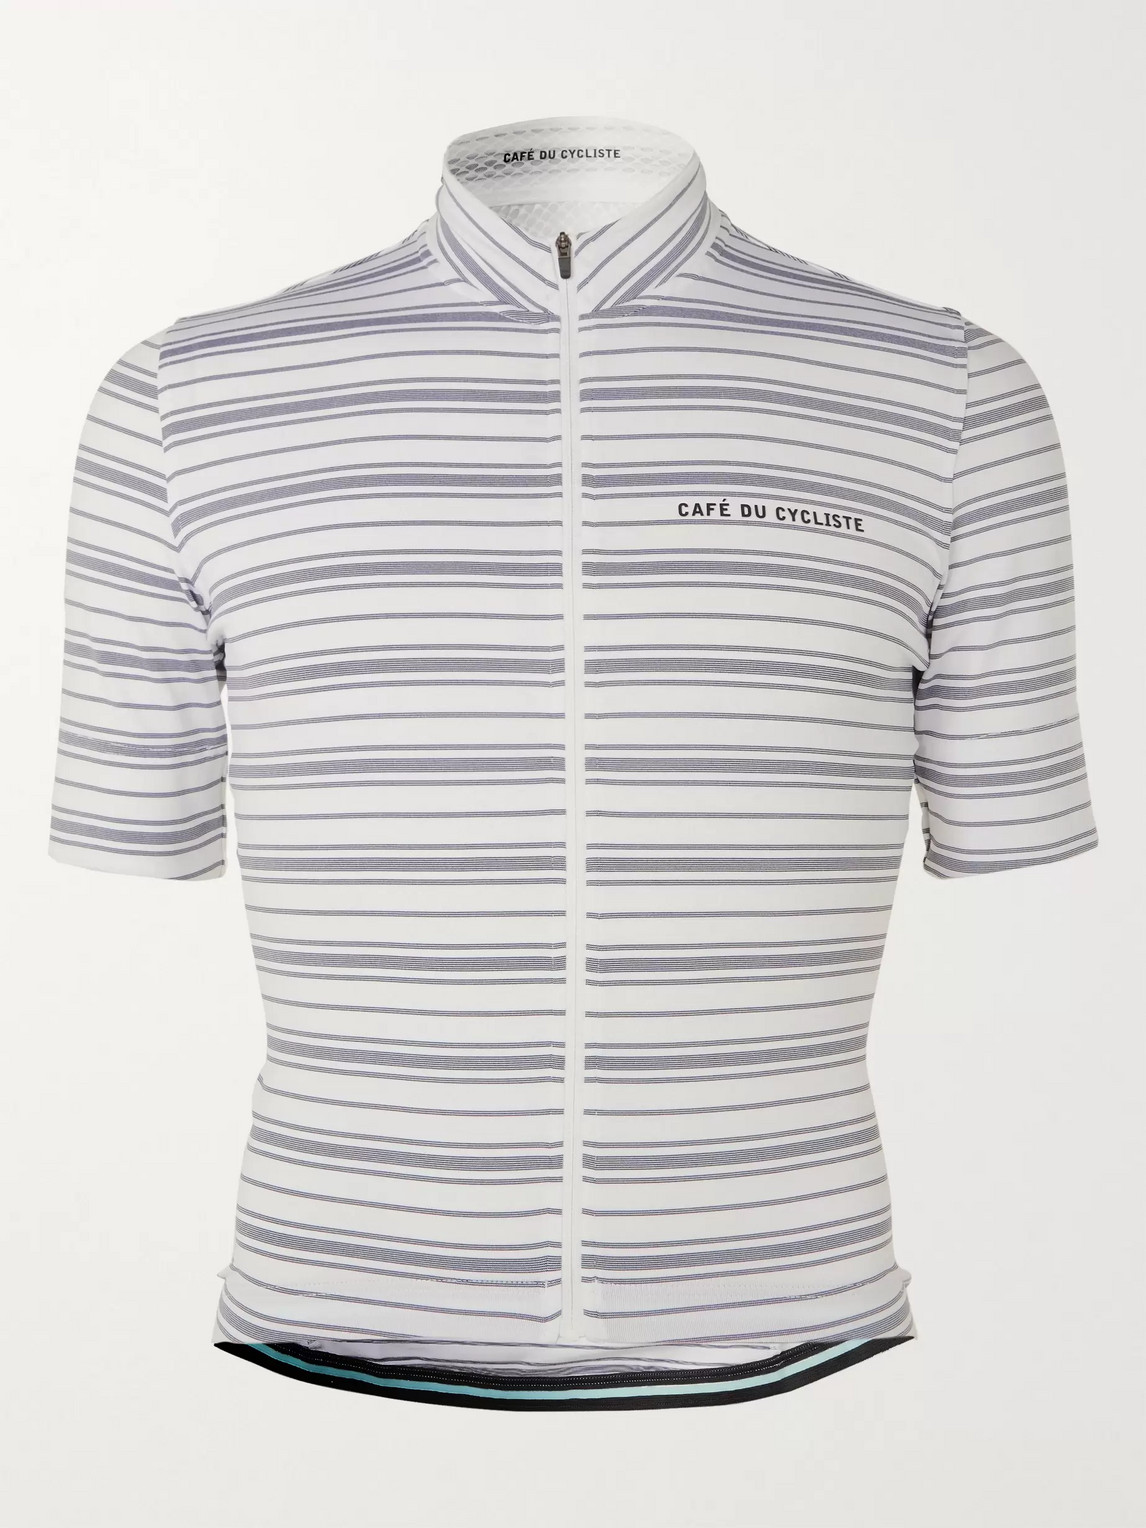 Cafe Du Cycliste Francine Striped Cycling Jersey In White